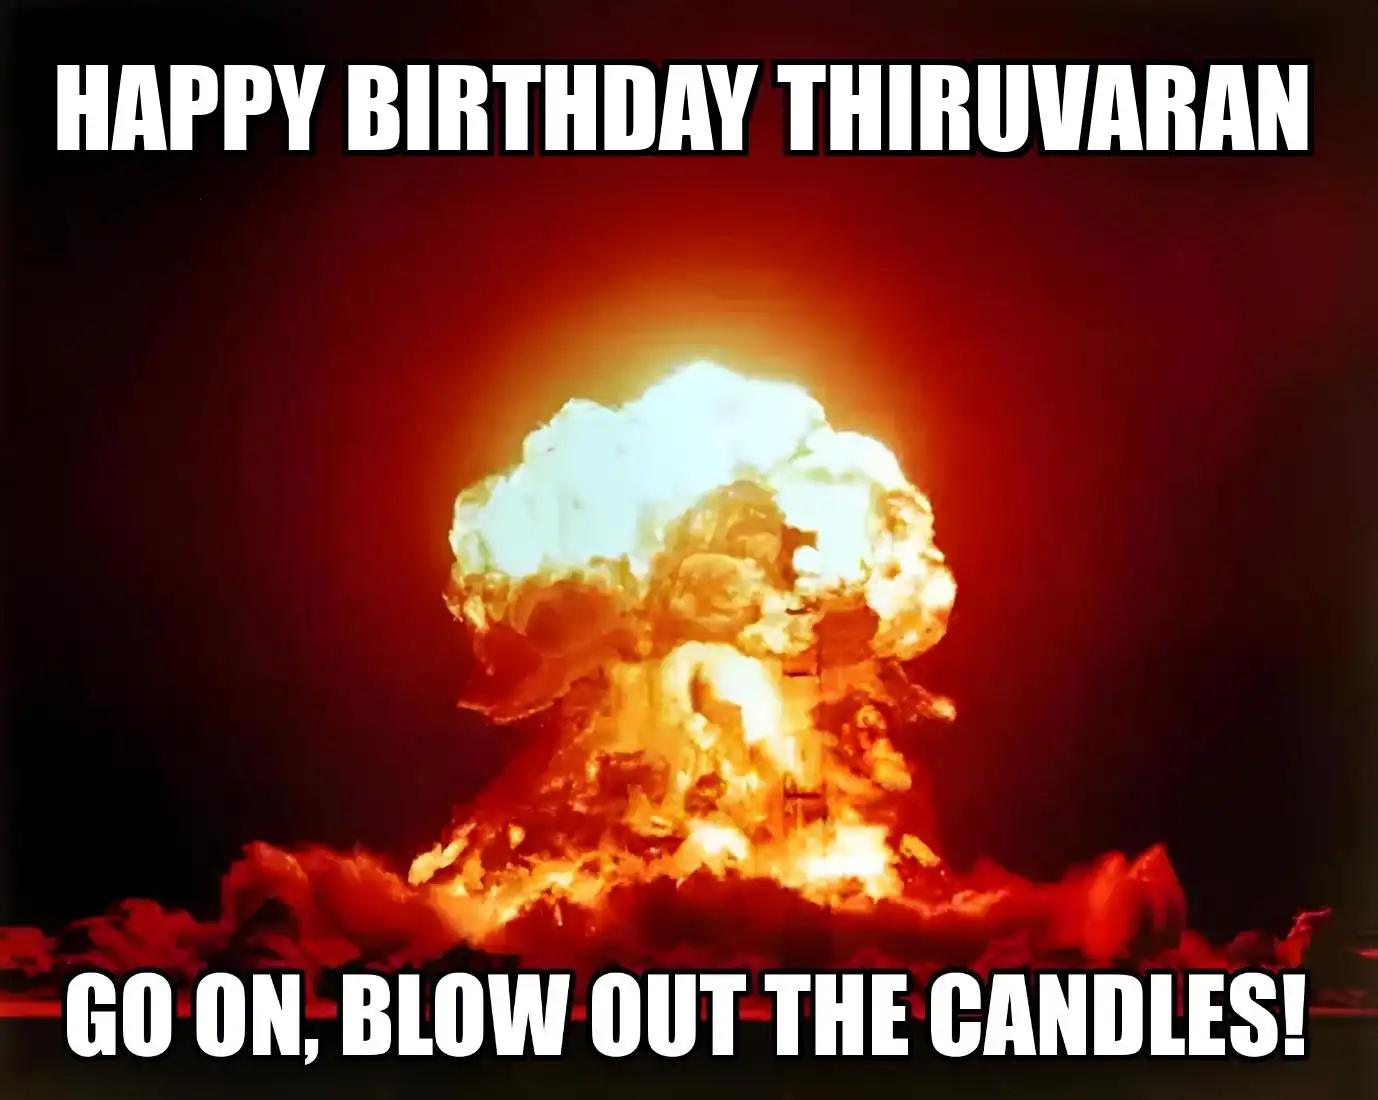 Happy Birthday Thiruvaran Go On Blow Out The Candles Meme